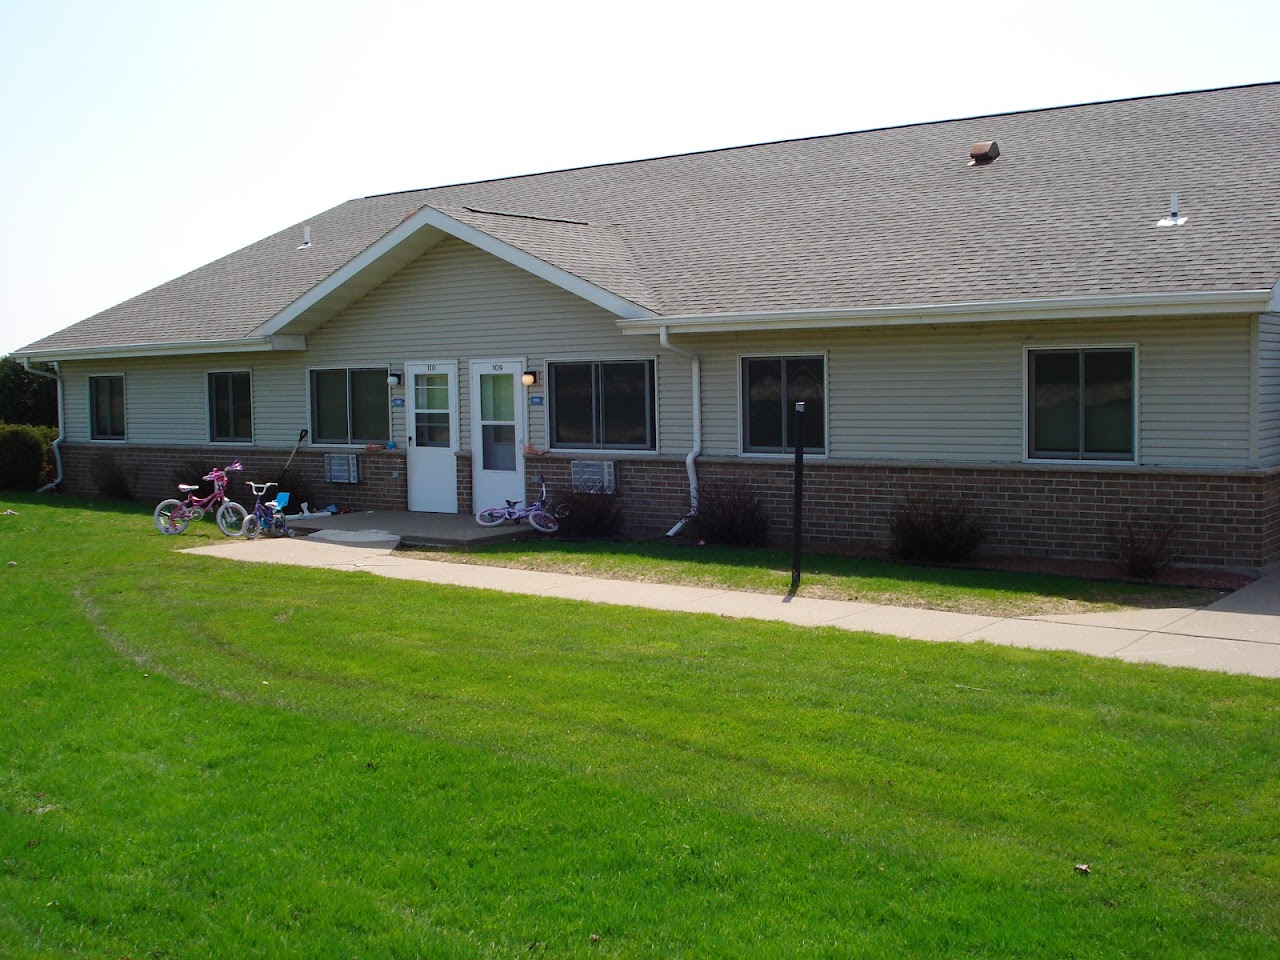 Photo of JNB BADGER SOUTH LP. Affordable housing located at 102 N PARK ST BELMONT, WI 53510